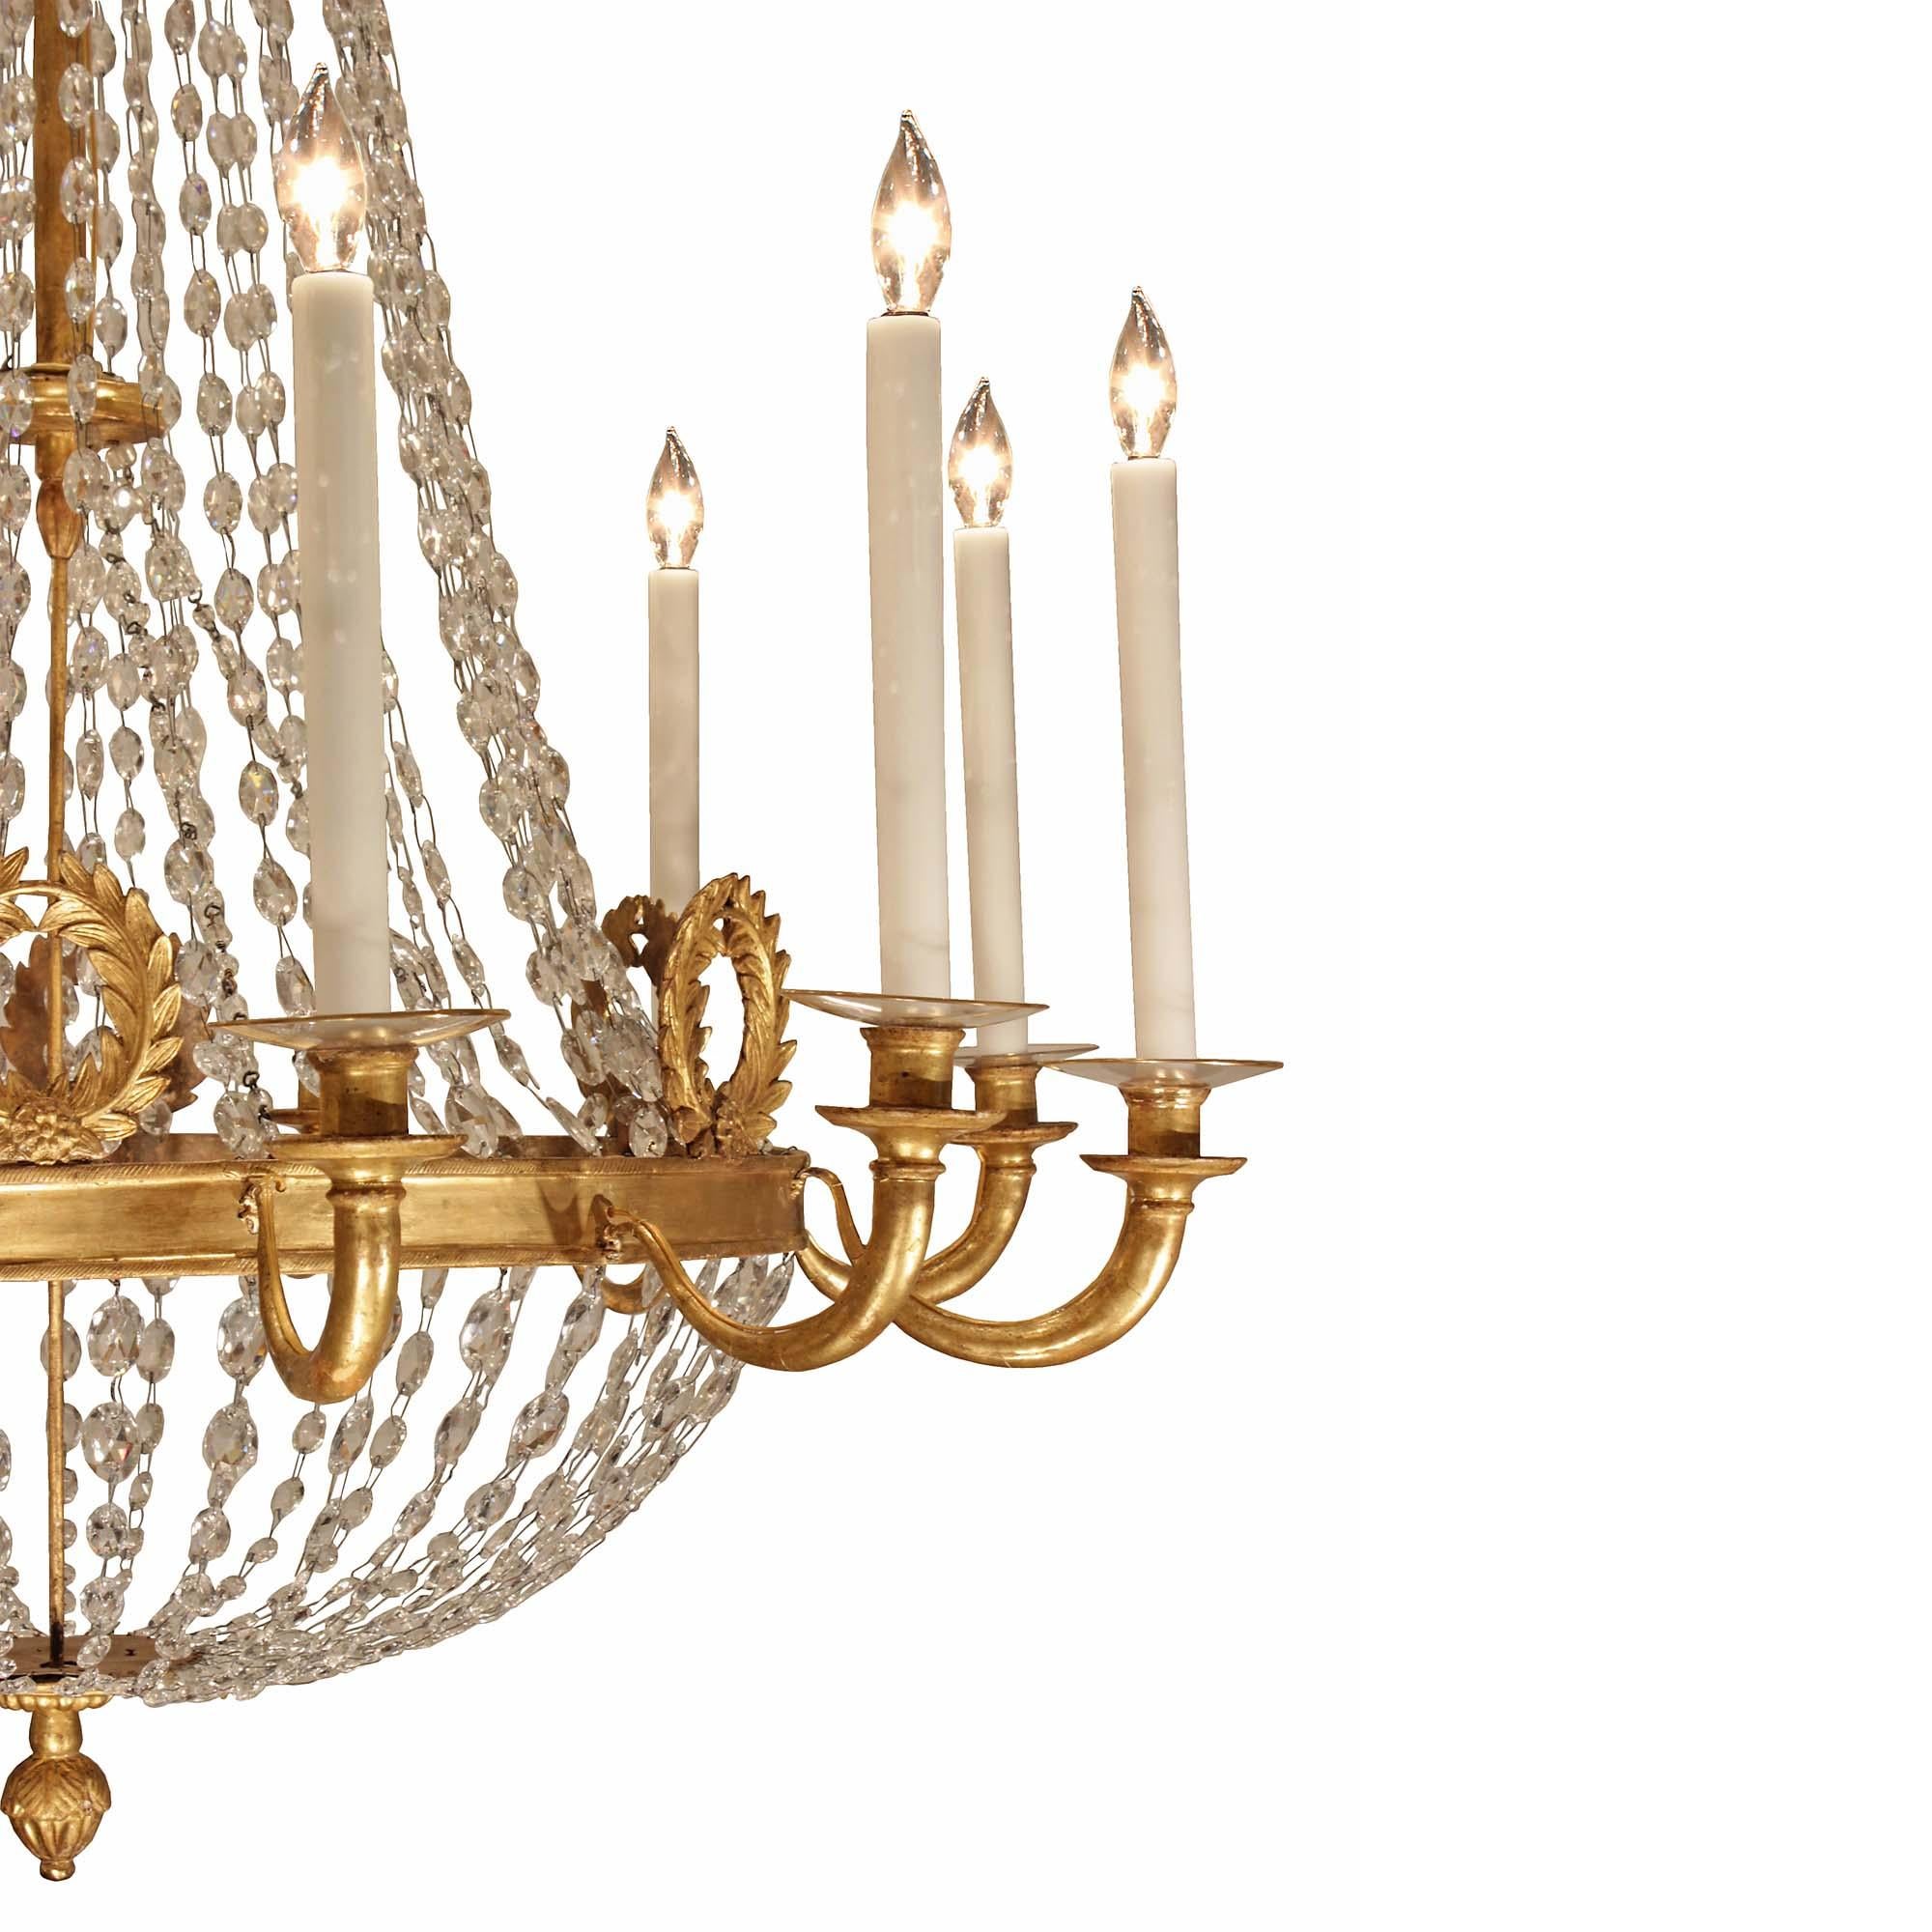 Italian 18th Century Louis XVI Period Giltwood Chandelier In Good Condition For Sale In West Palm Beach, FL